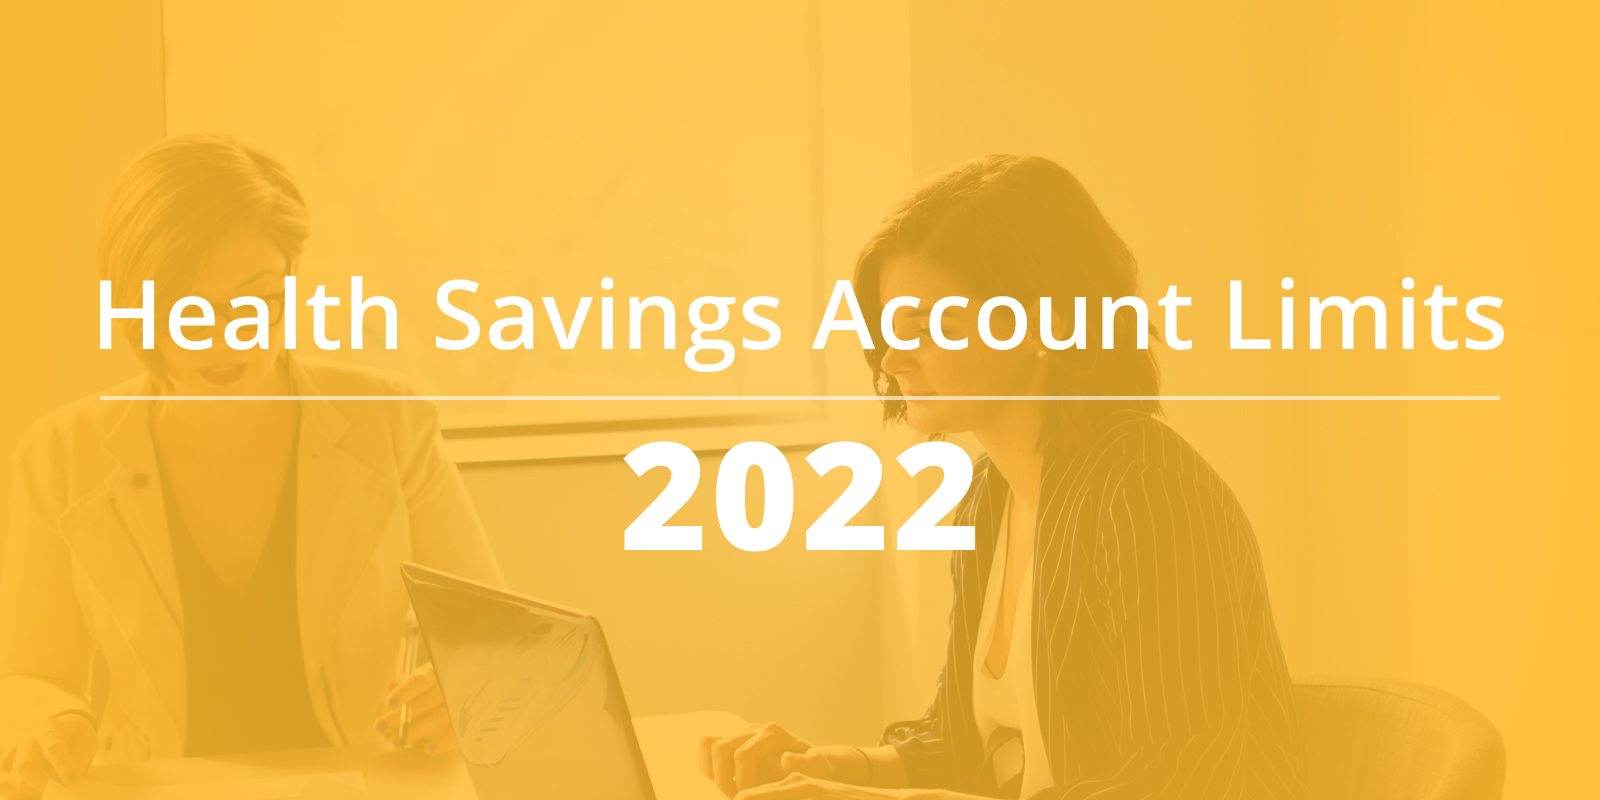 Health Savings Account Contribution Limits for 2022